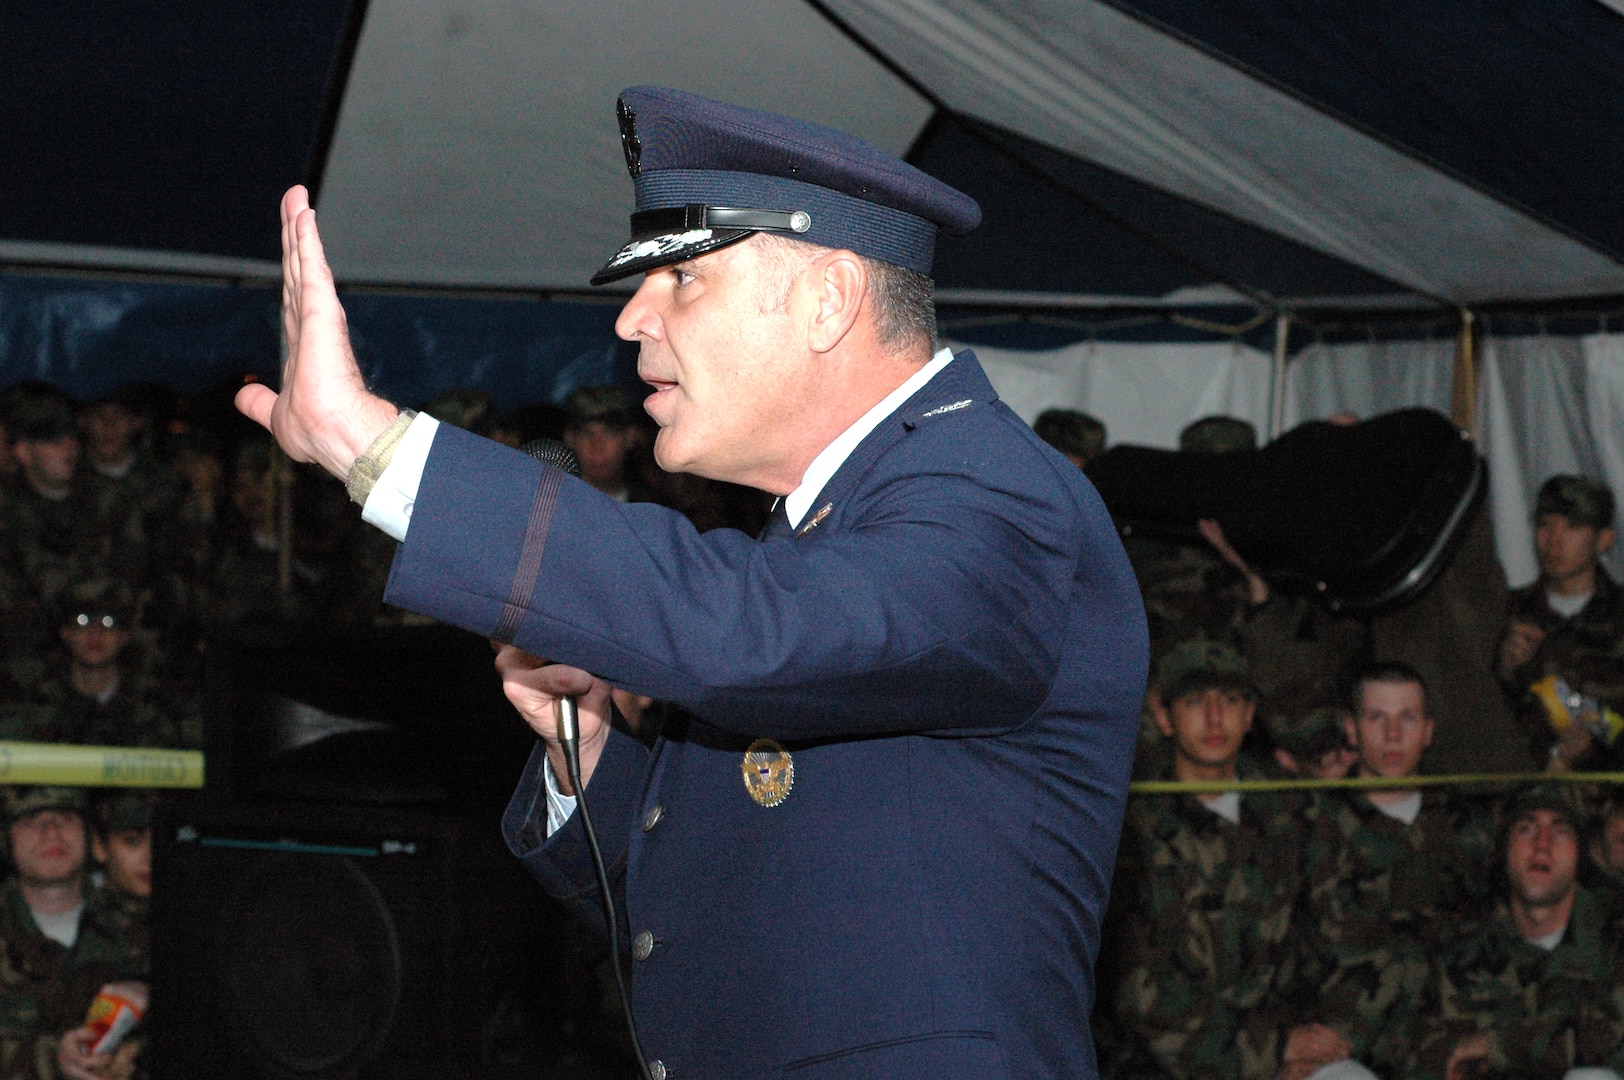 Col. Robert MacDonald, 737th Training Group commander, wishes the basic trainees at the Christmas Eve Extravaganza a happy and safe holiday at the start of the event on Dec. 24 at Lackland Air Force Base, Texas. (USAF photo by Staff Sgt. Tim Russer)